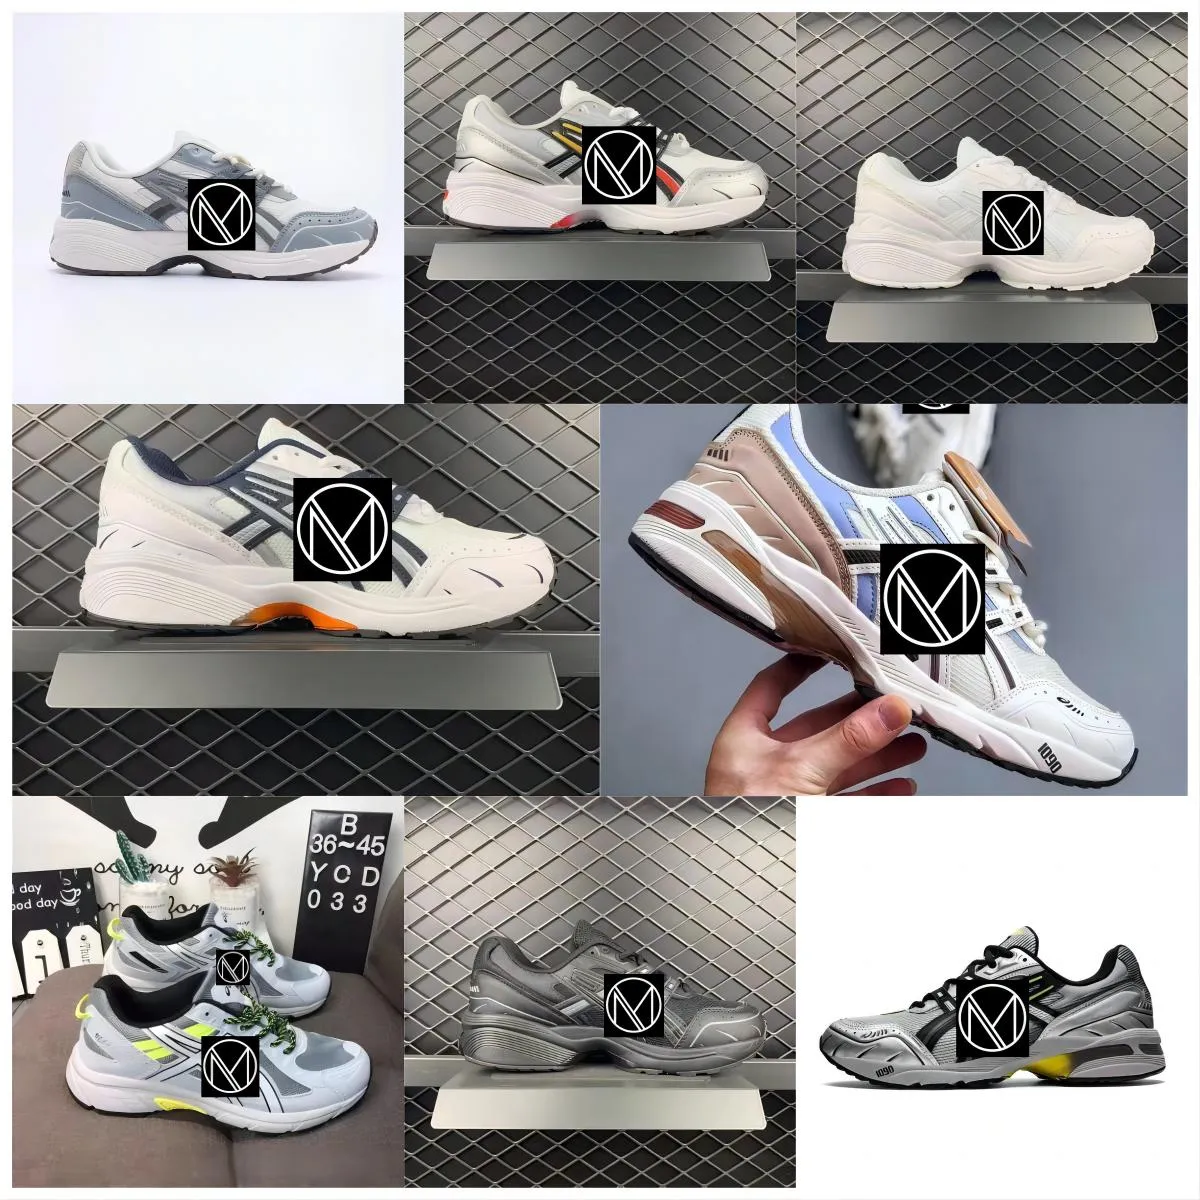 GEL 8 Mens Casual Shoes SneakerS Lighted Gomma leather Trainer Nylon Printed Platform Sneakers Men Light Shoes with box SIZE 36-45